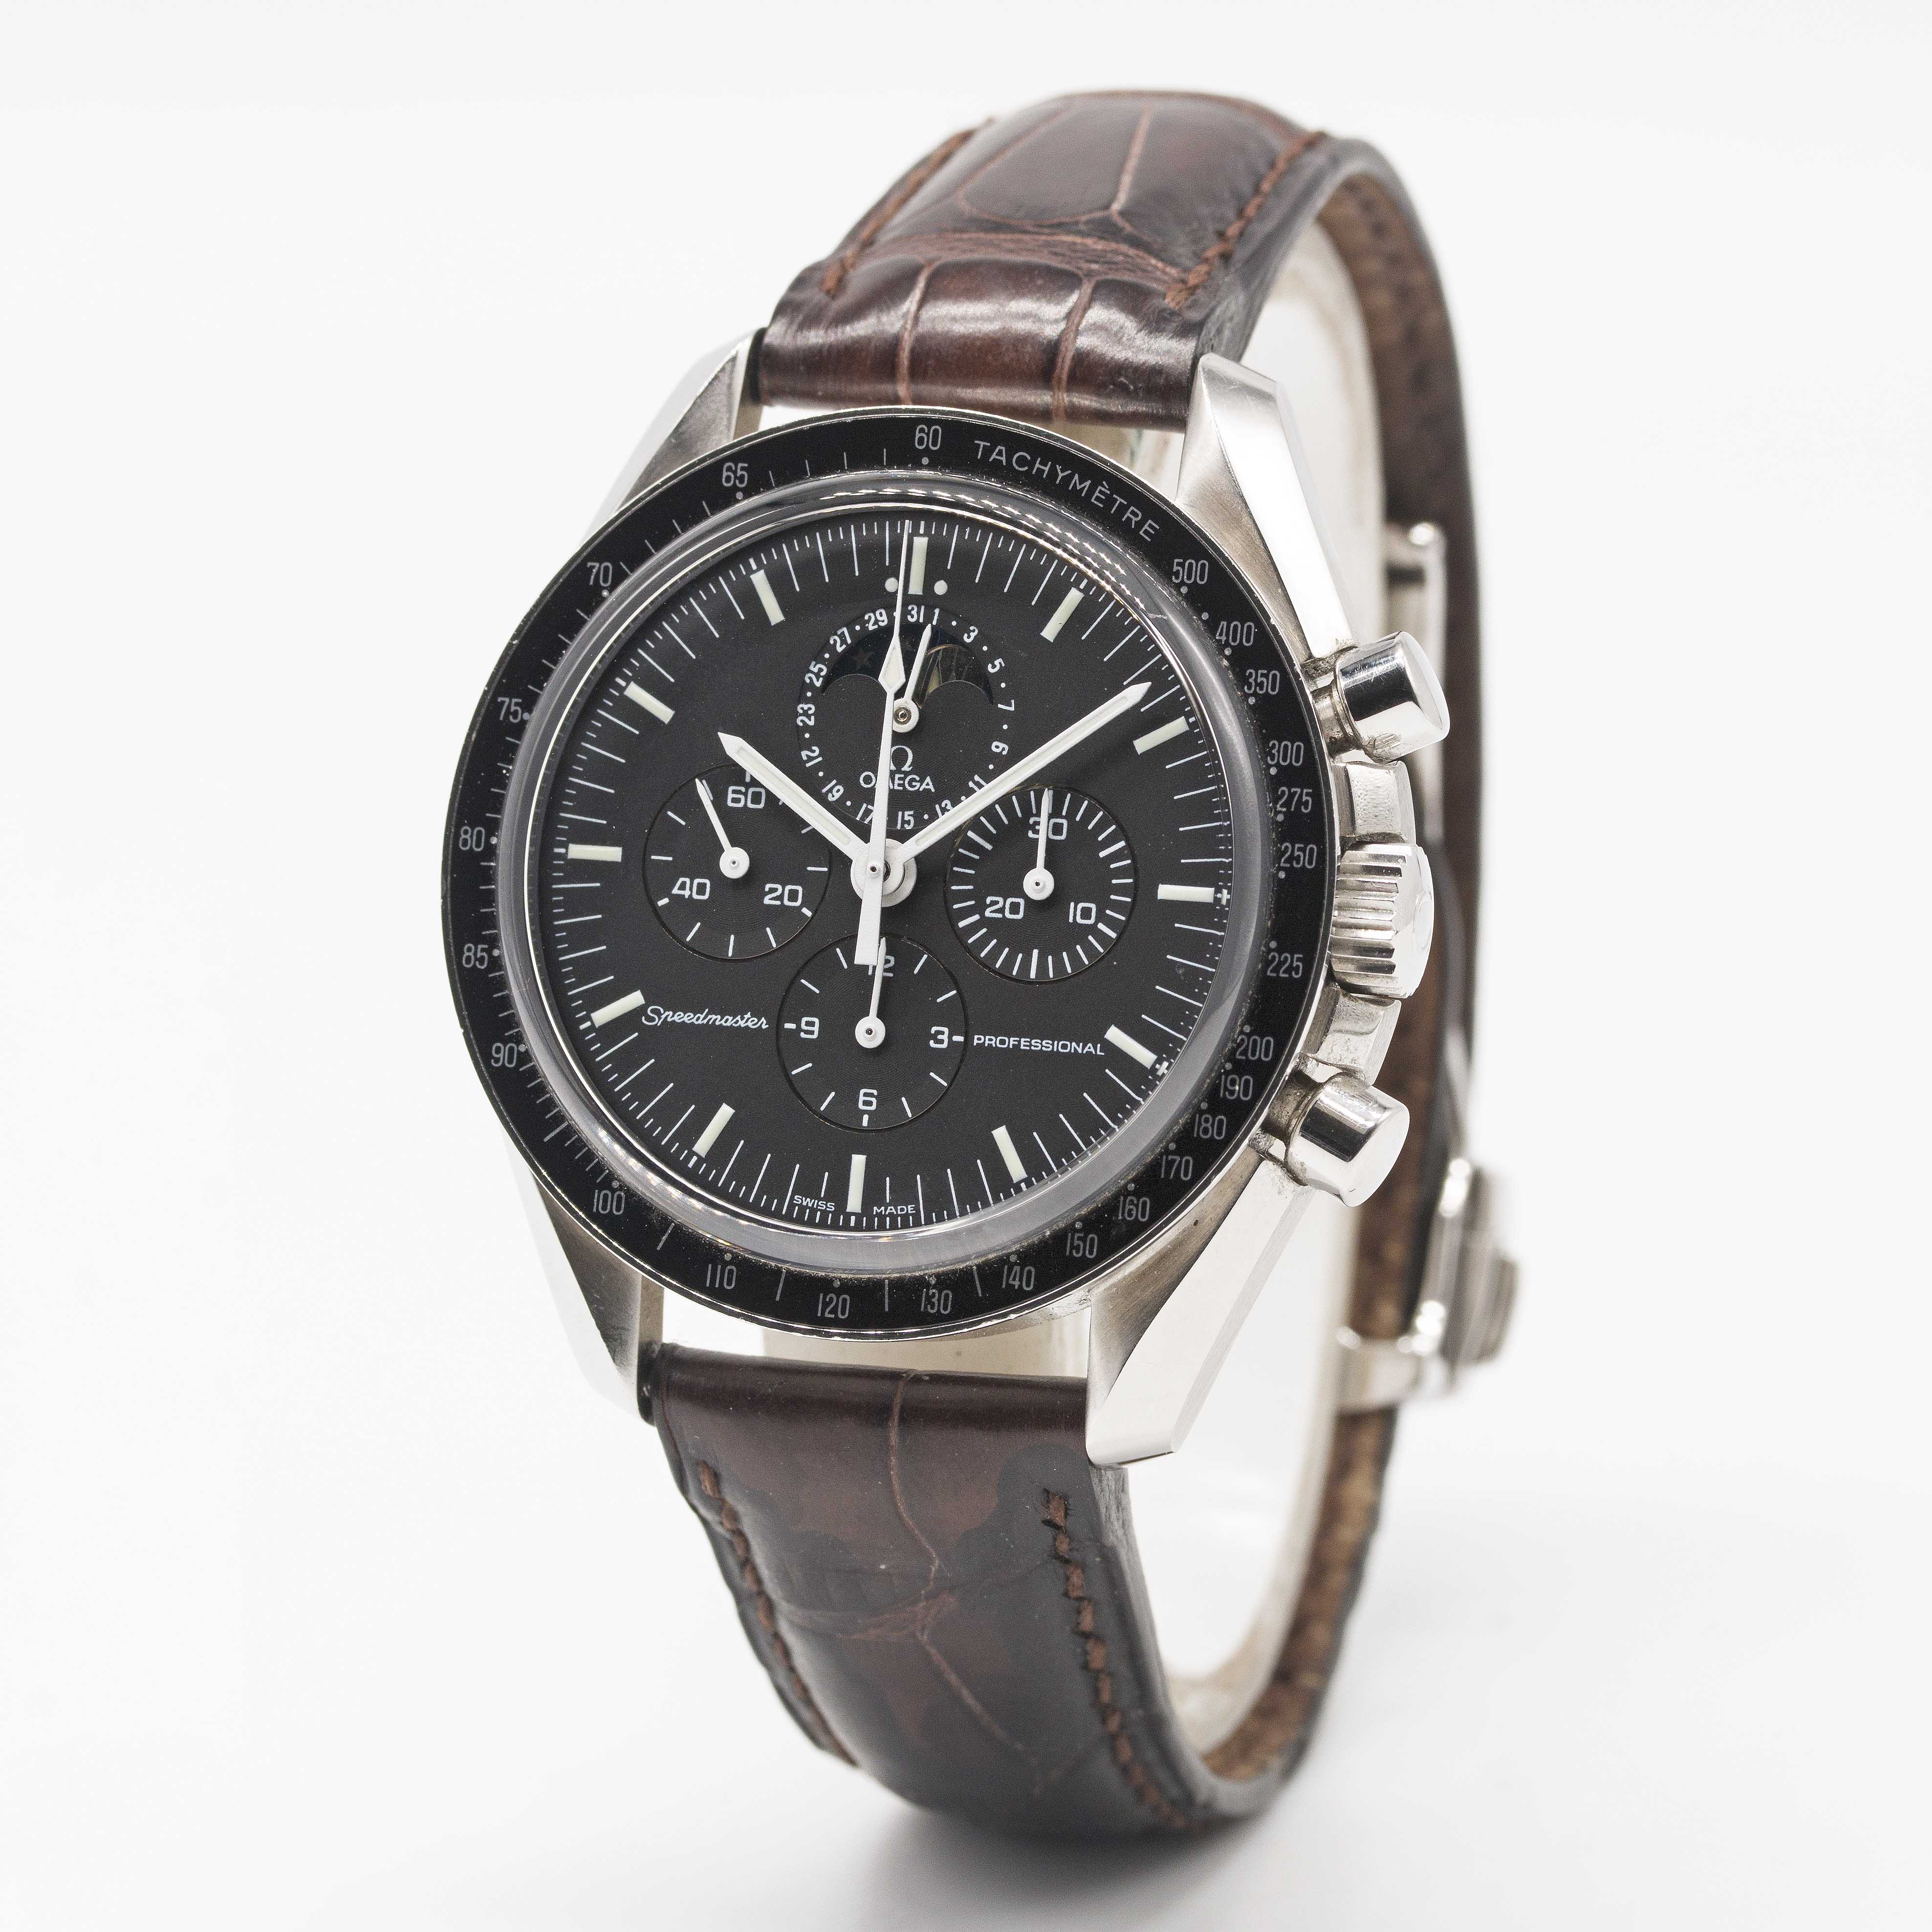 A GENTLEMAN'S STAINLESS STEEL OMEGA SPEEDMASTER PROFESSIONAL MOONPHASE CHRONOGRAPH WRIST WATCH CIRCA - Image 3 of 6